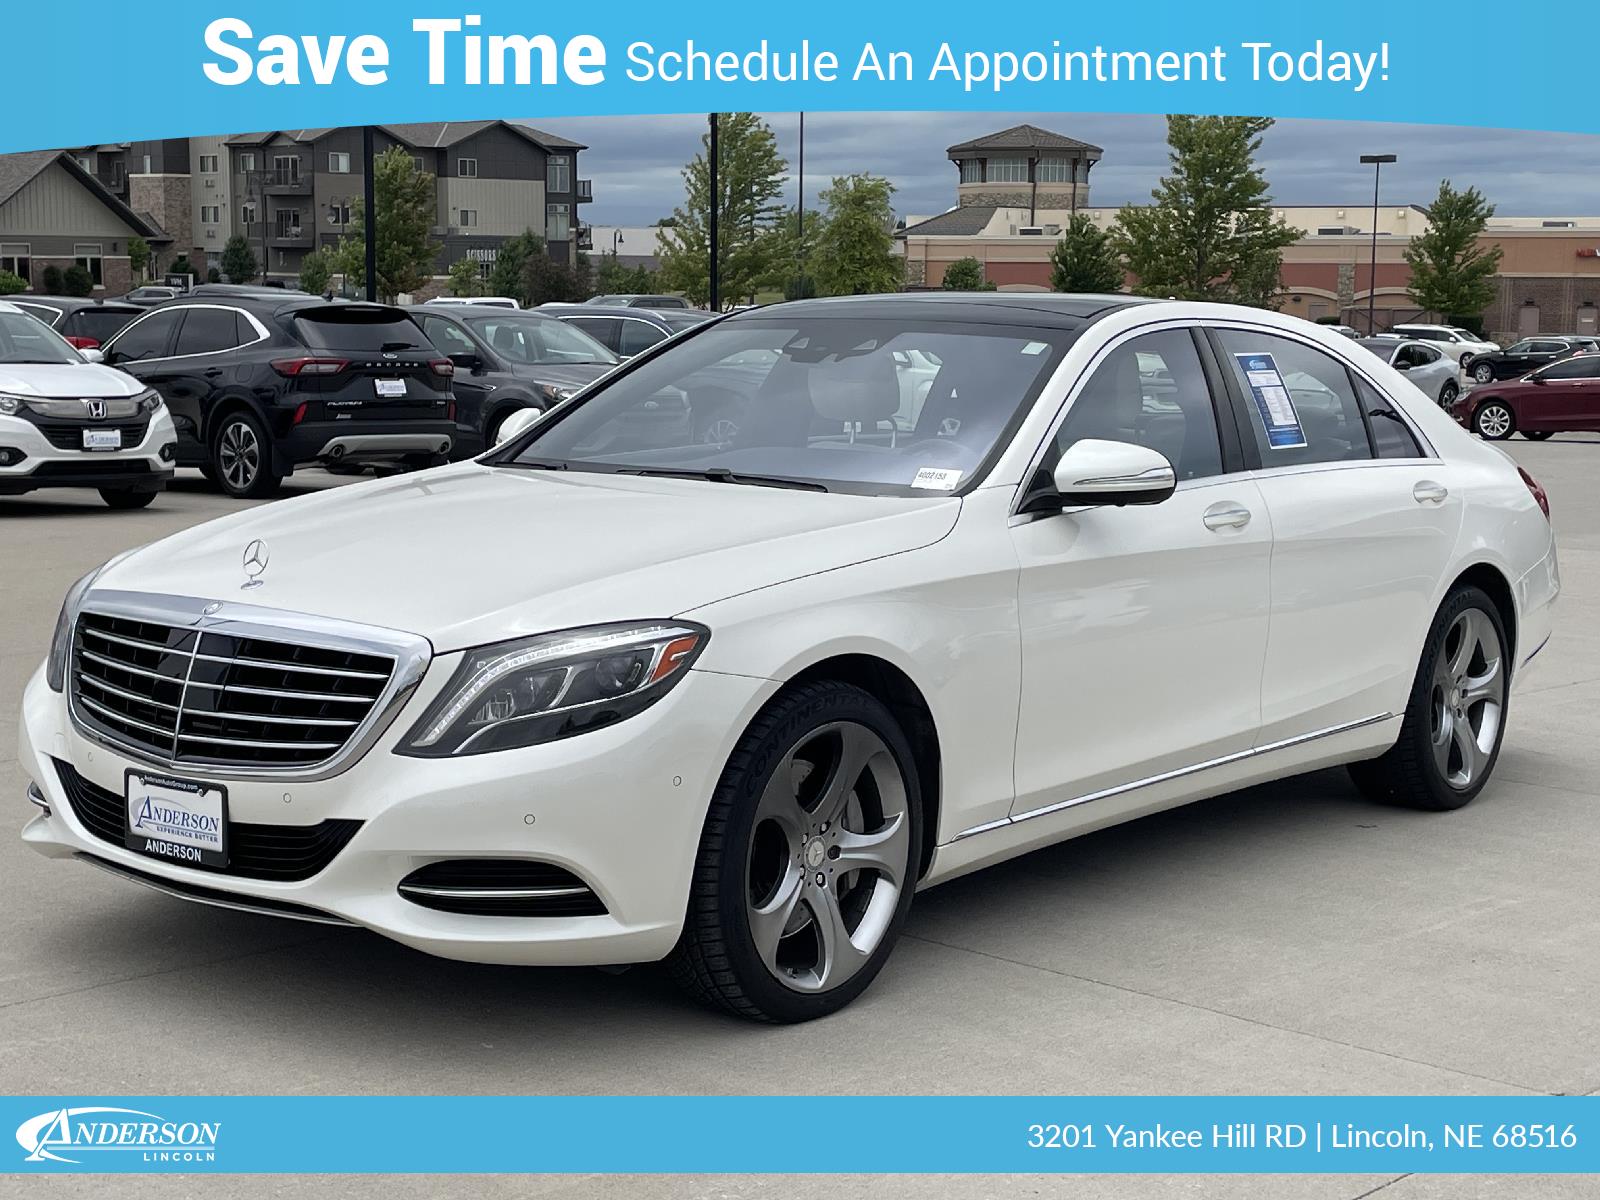 Used 2015 Mercedes-Benz S-Class S 550 Stock: 4002153